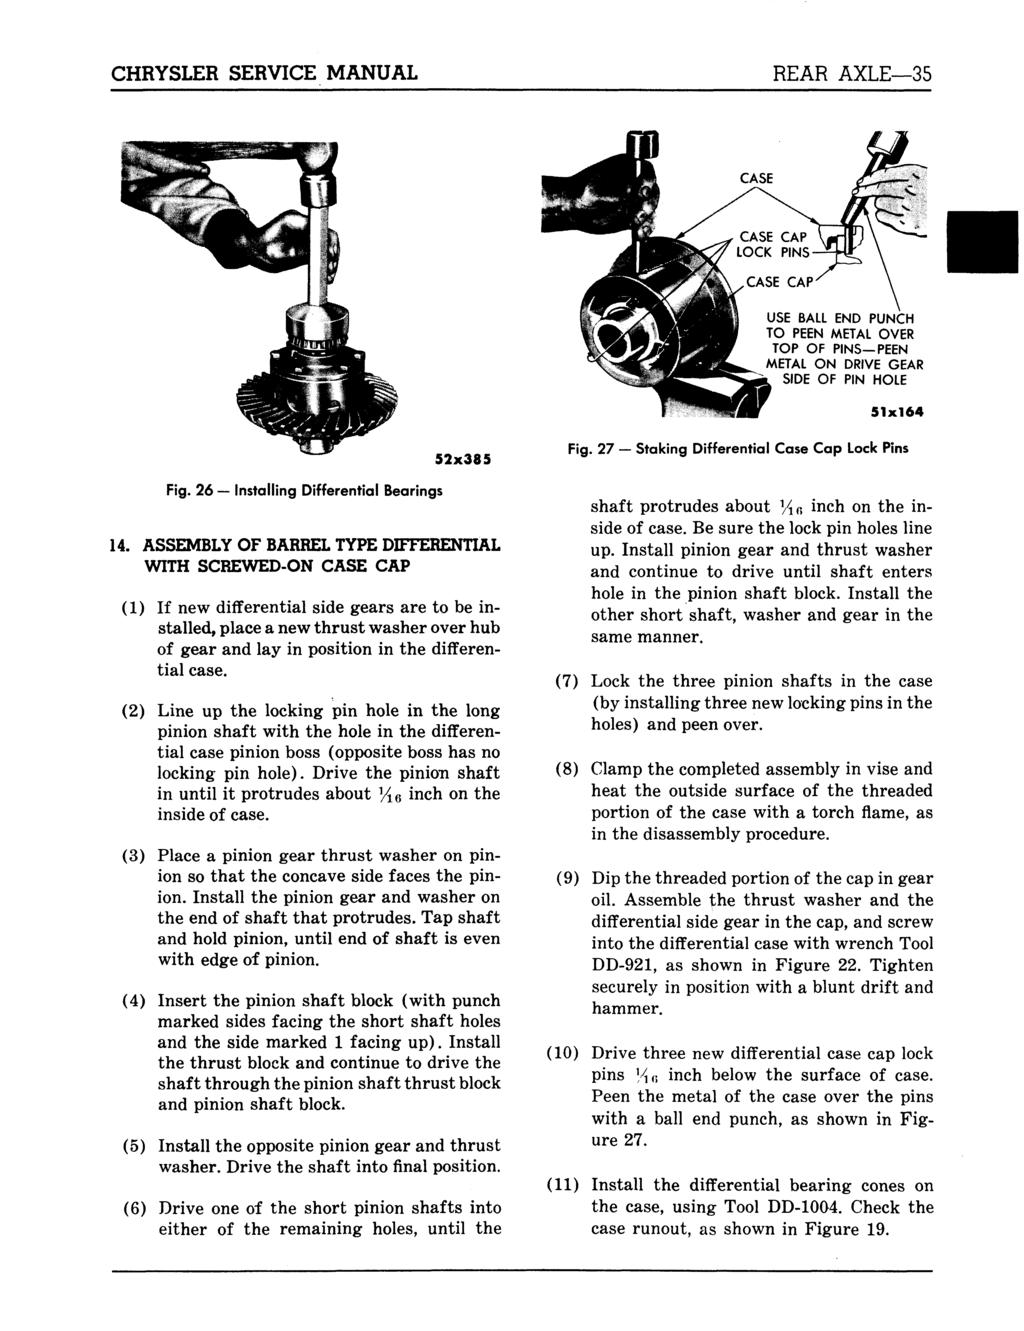 CHRYSLER SERVICE MANUAL REAR AXLE 35 USE BALL END PUNCH TO PEEN METAL OVER TOP OF PINS PEEN METAL ON DRIVE GEAR SIDE OF PIN HOLE 51x164 Fig. 26 Installing Differential Bearings 52x385 14.